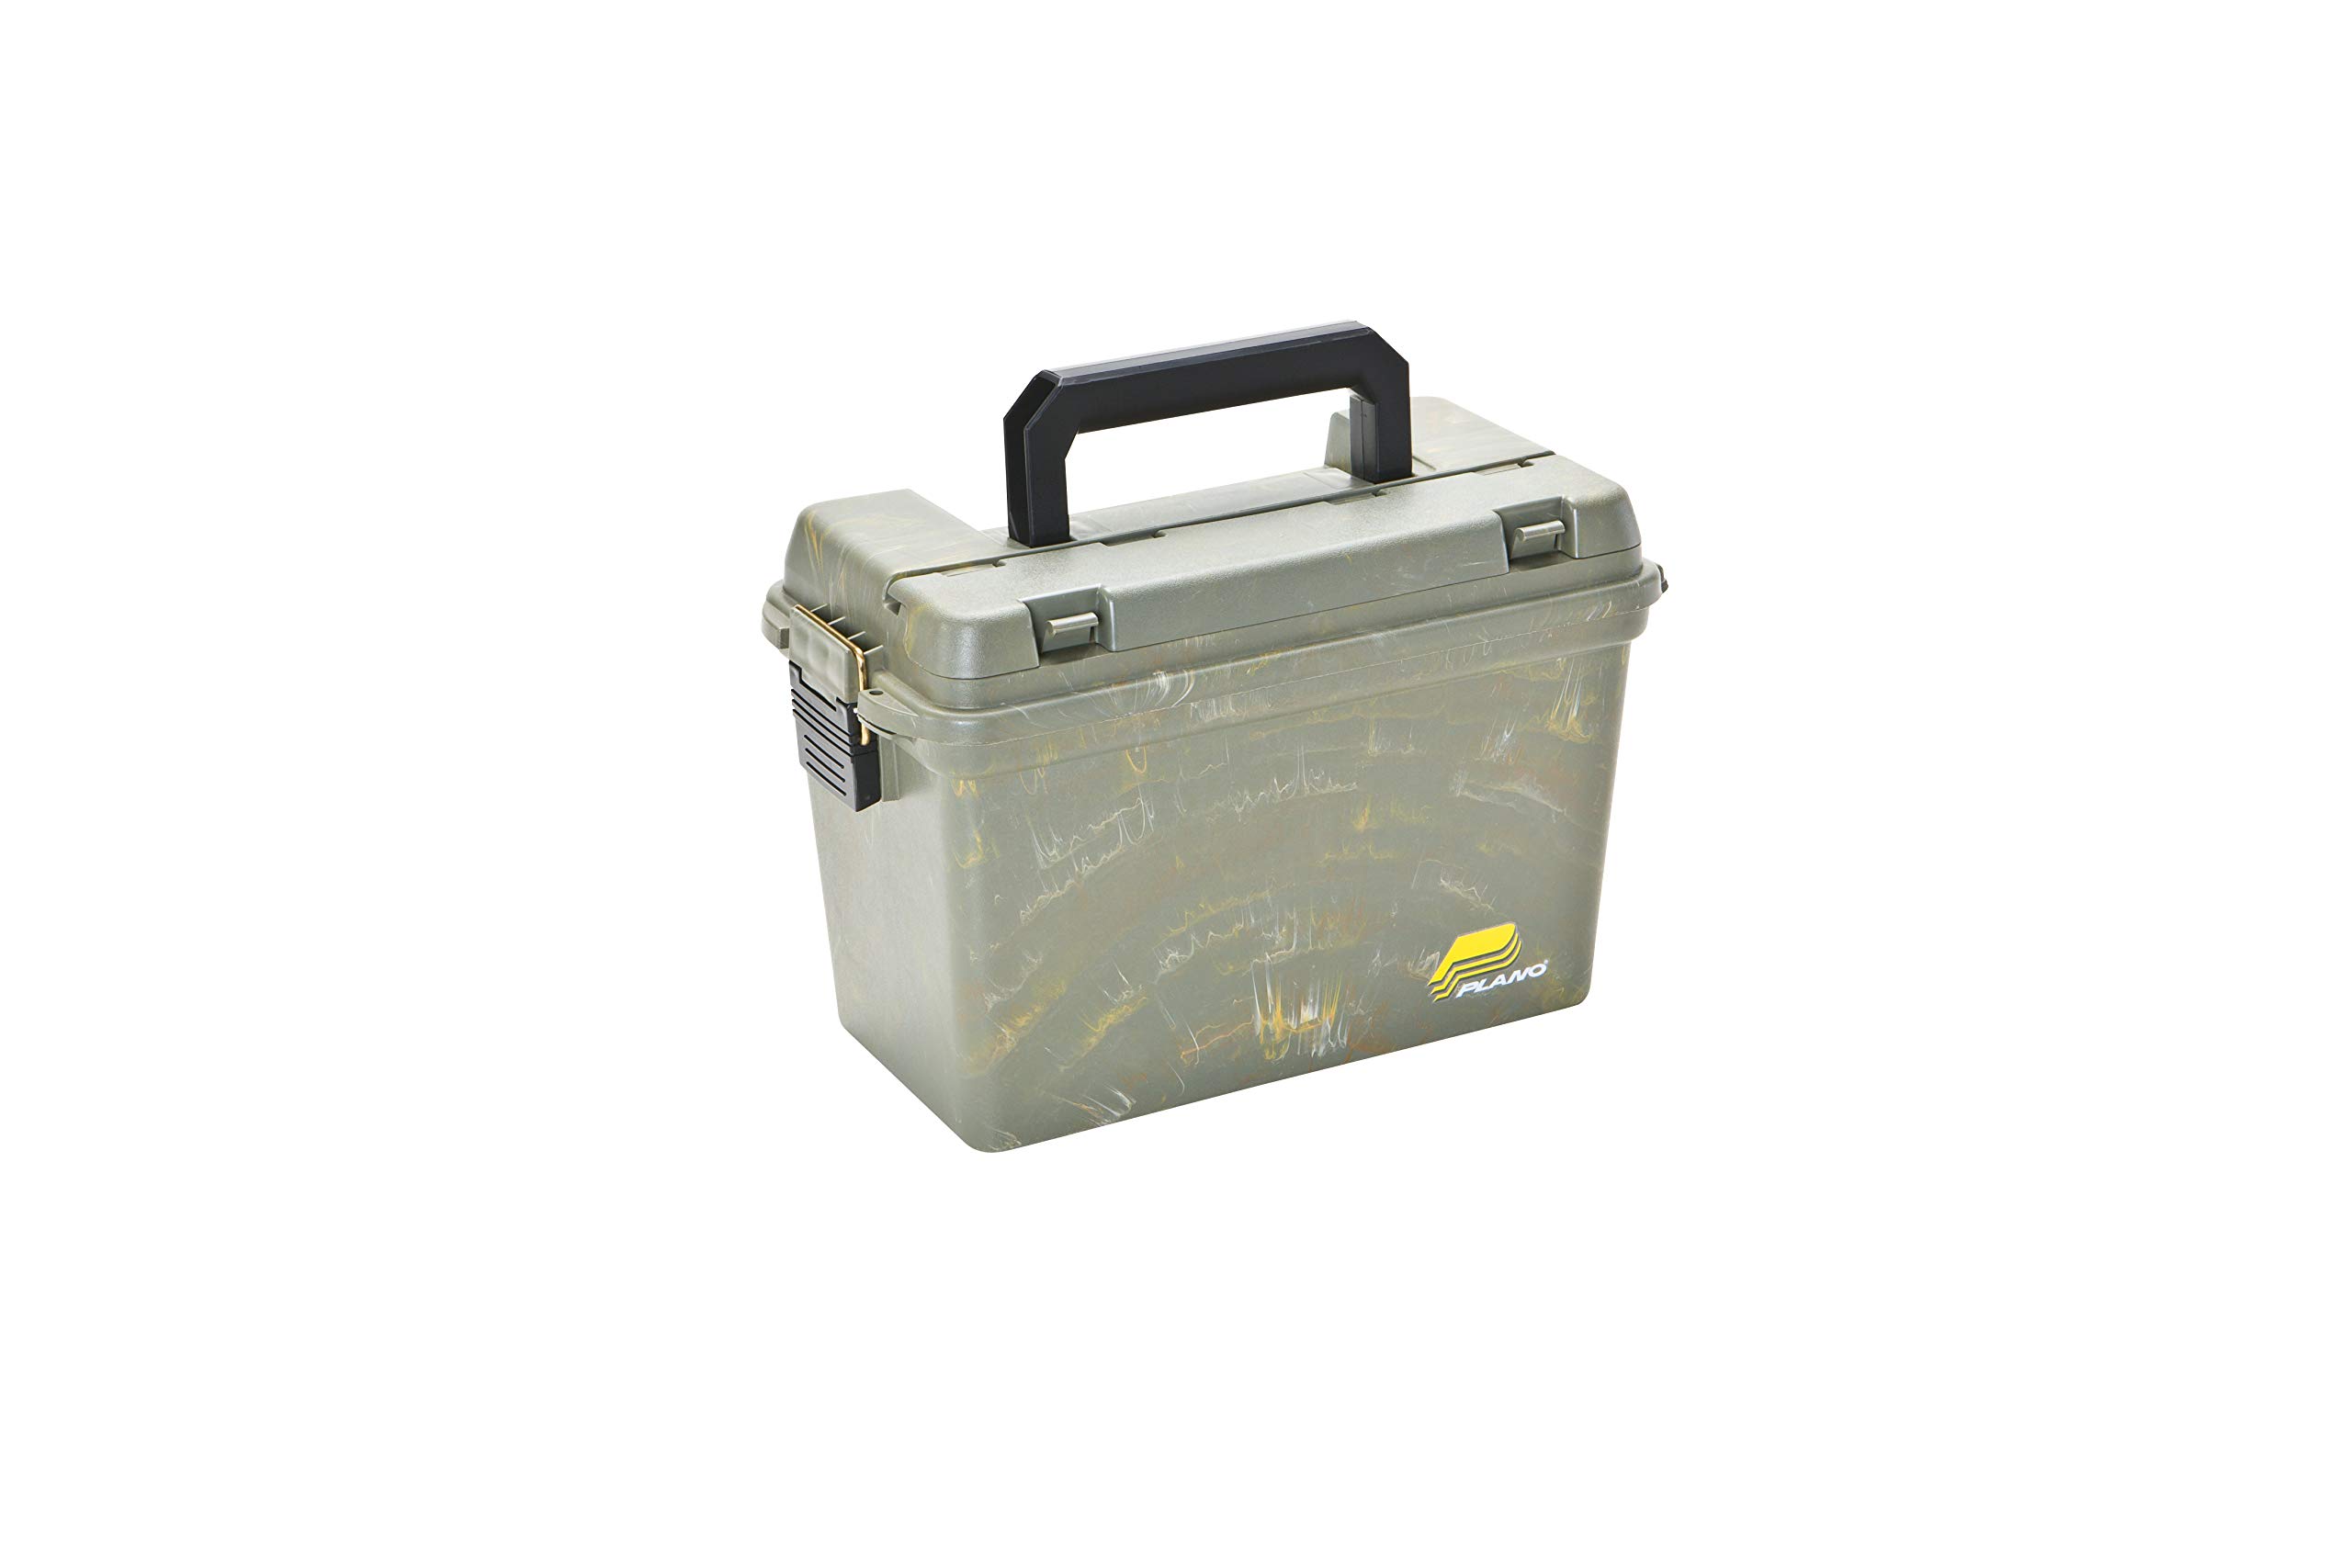 Plano Field Box Large Camo Swirl Field Box With Lift Out Tray